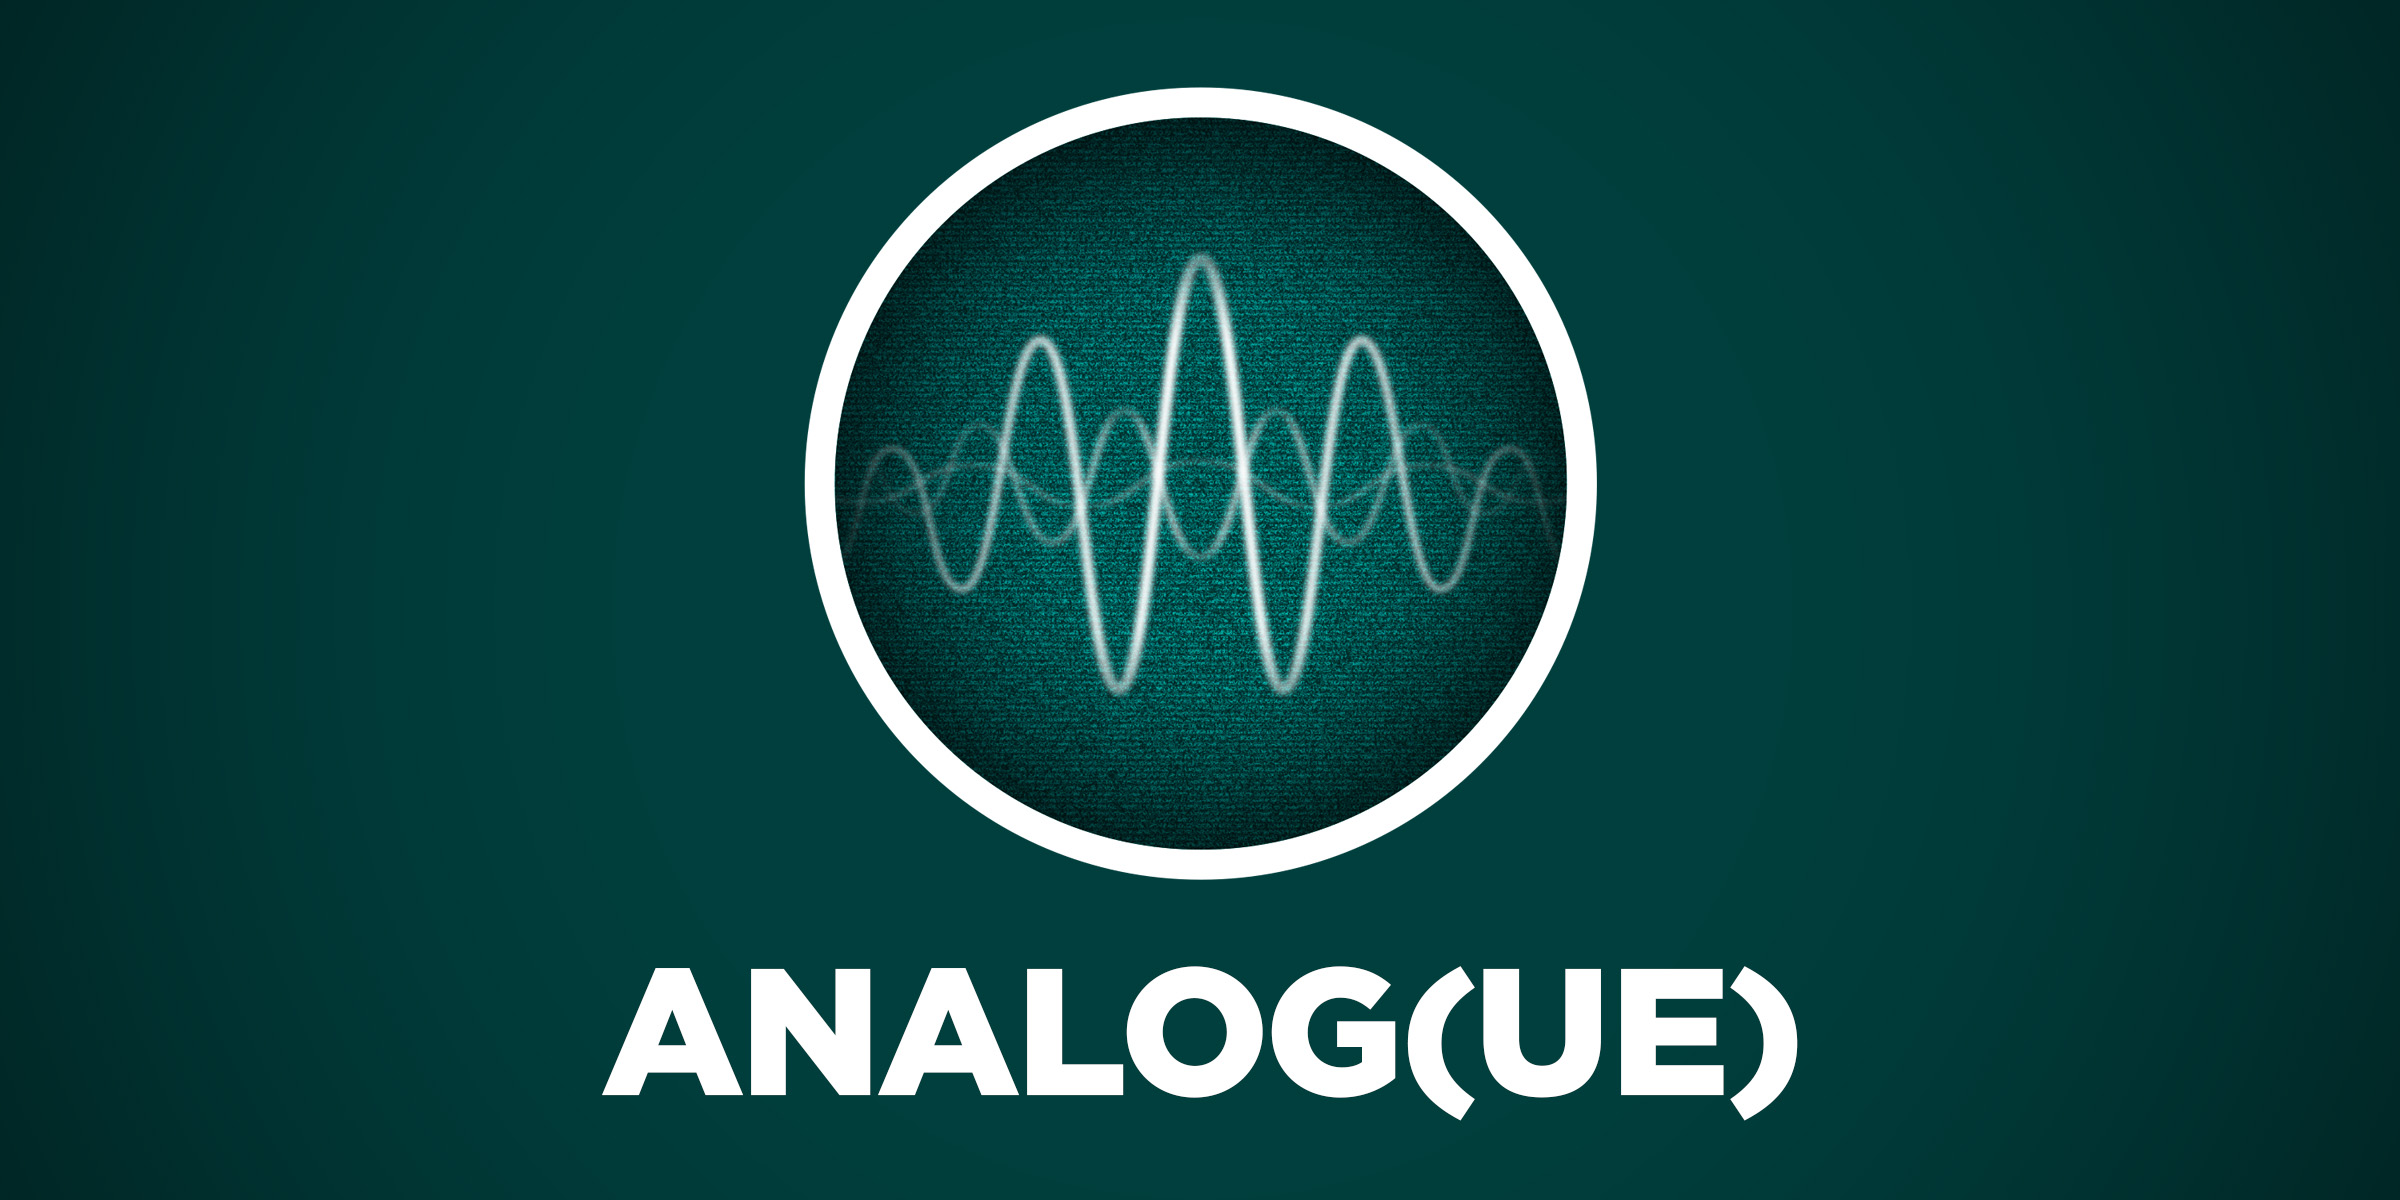 Analog(ue) #185: One of the Worst Things You Have Ever Done to Me